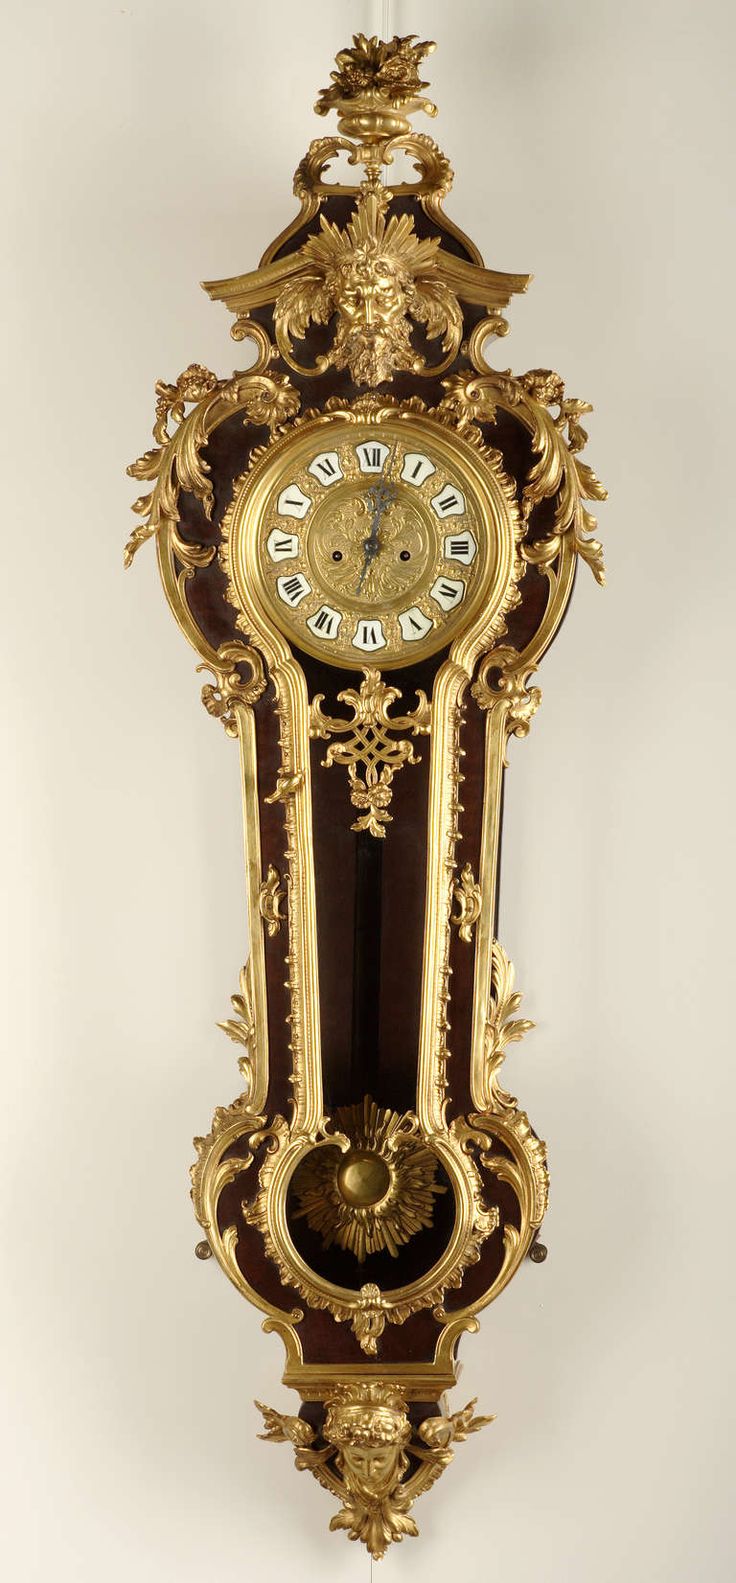 Taccard & King Hervelry Co. - A French Regence Style Wall Clock, Circa 1880 | Fr...